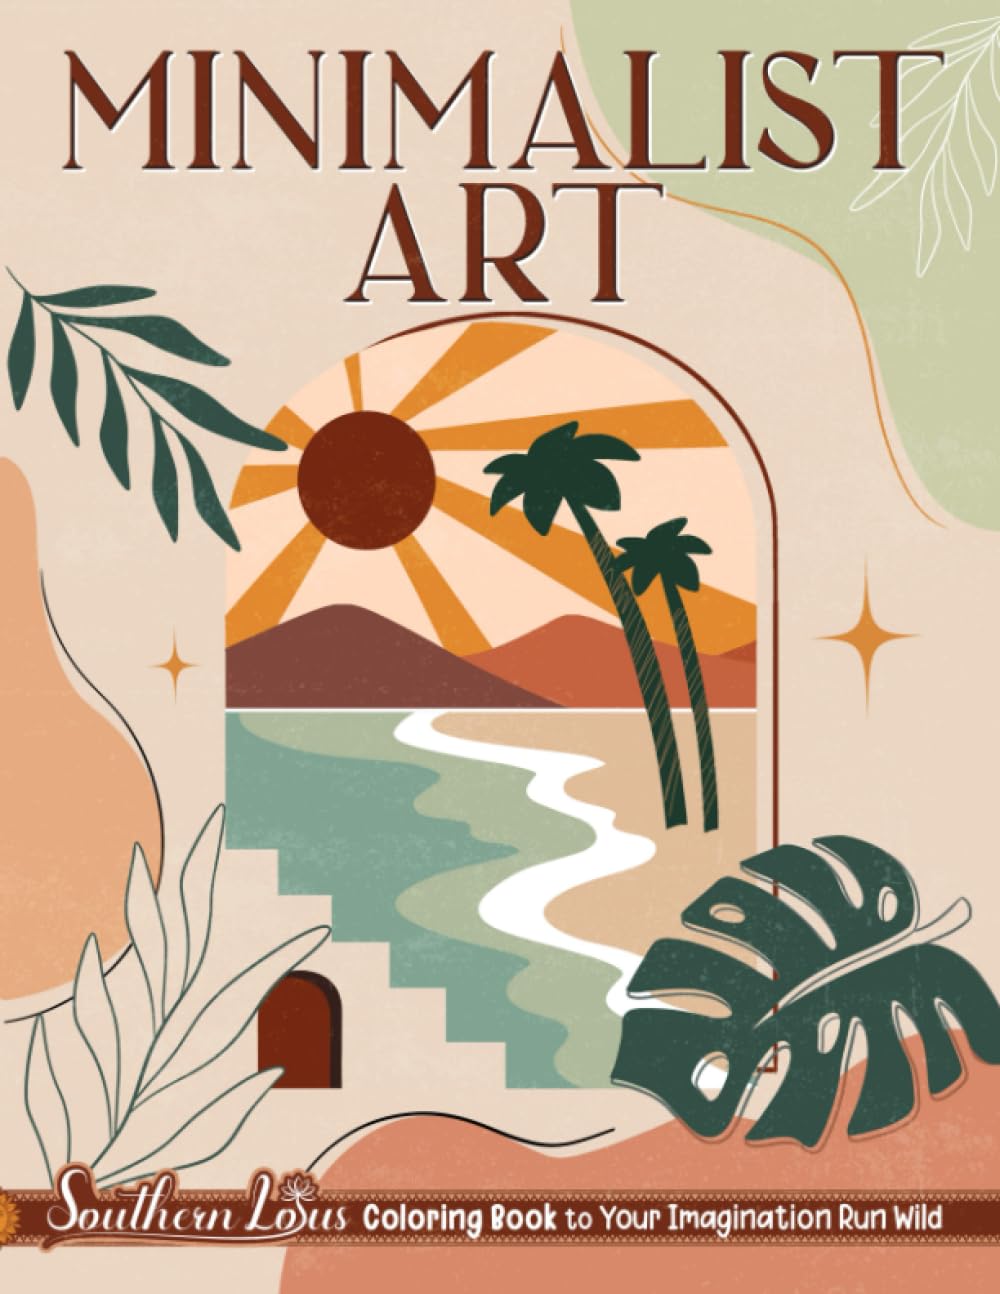 Adult coloring books include this cover showing a beach scene with sand, water, a sunset, and palm trees. Text reads Minimalist Art.